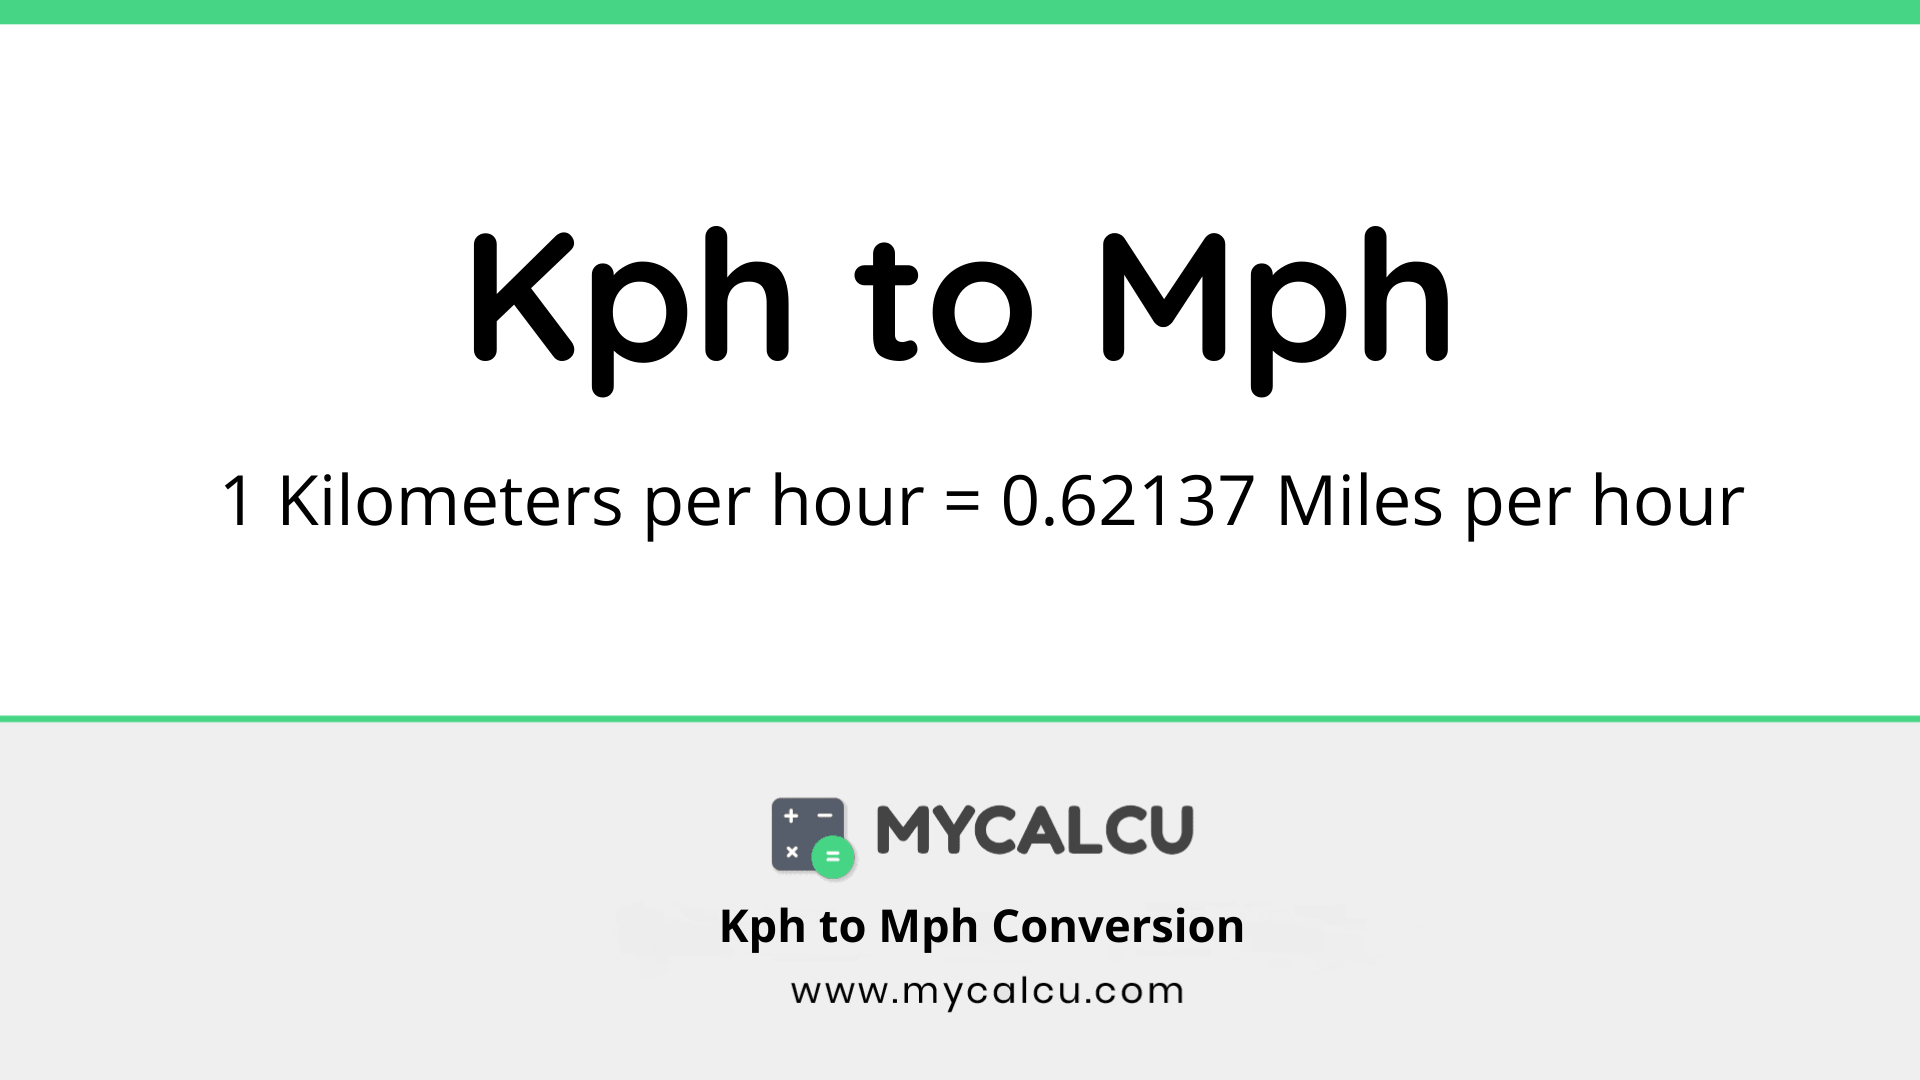 kph to mph